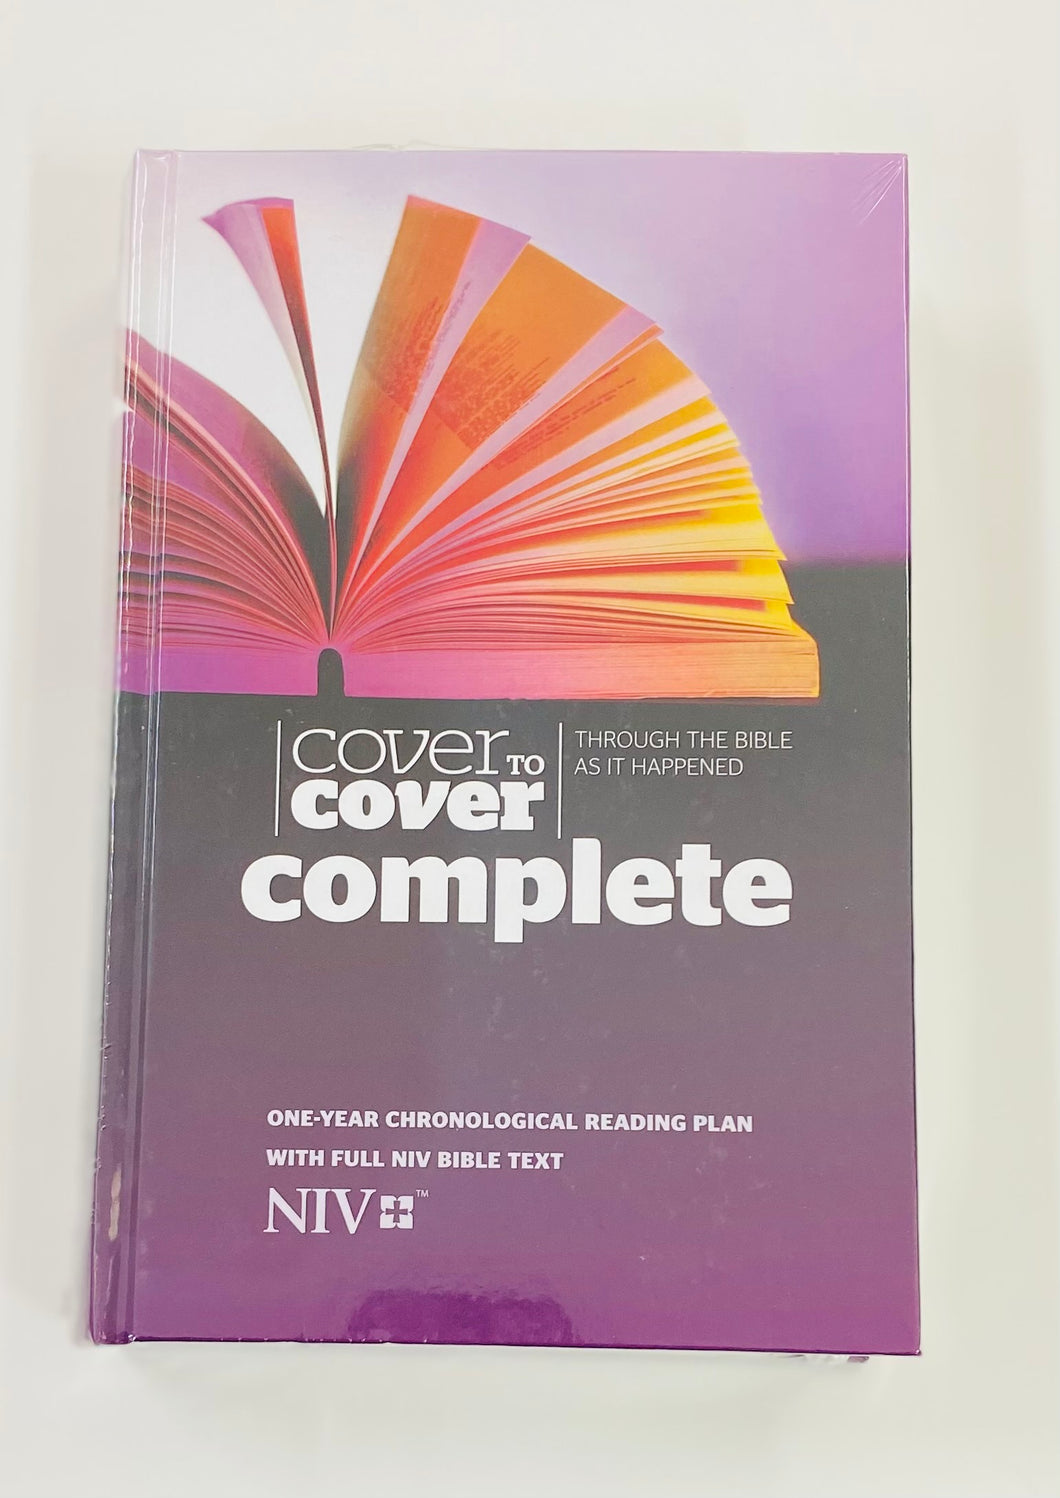 NIV Cover to Cover Complete- Through the bible as it happened.